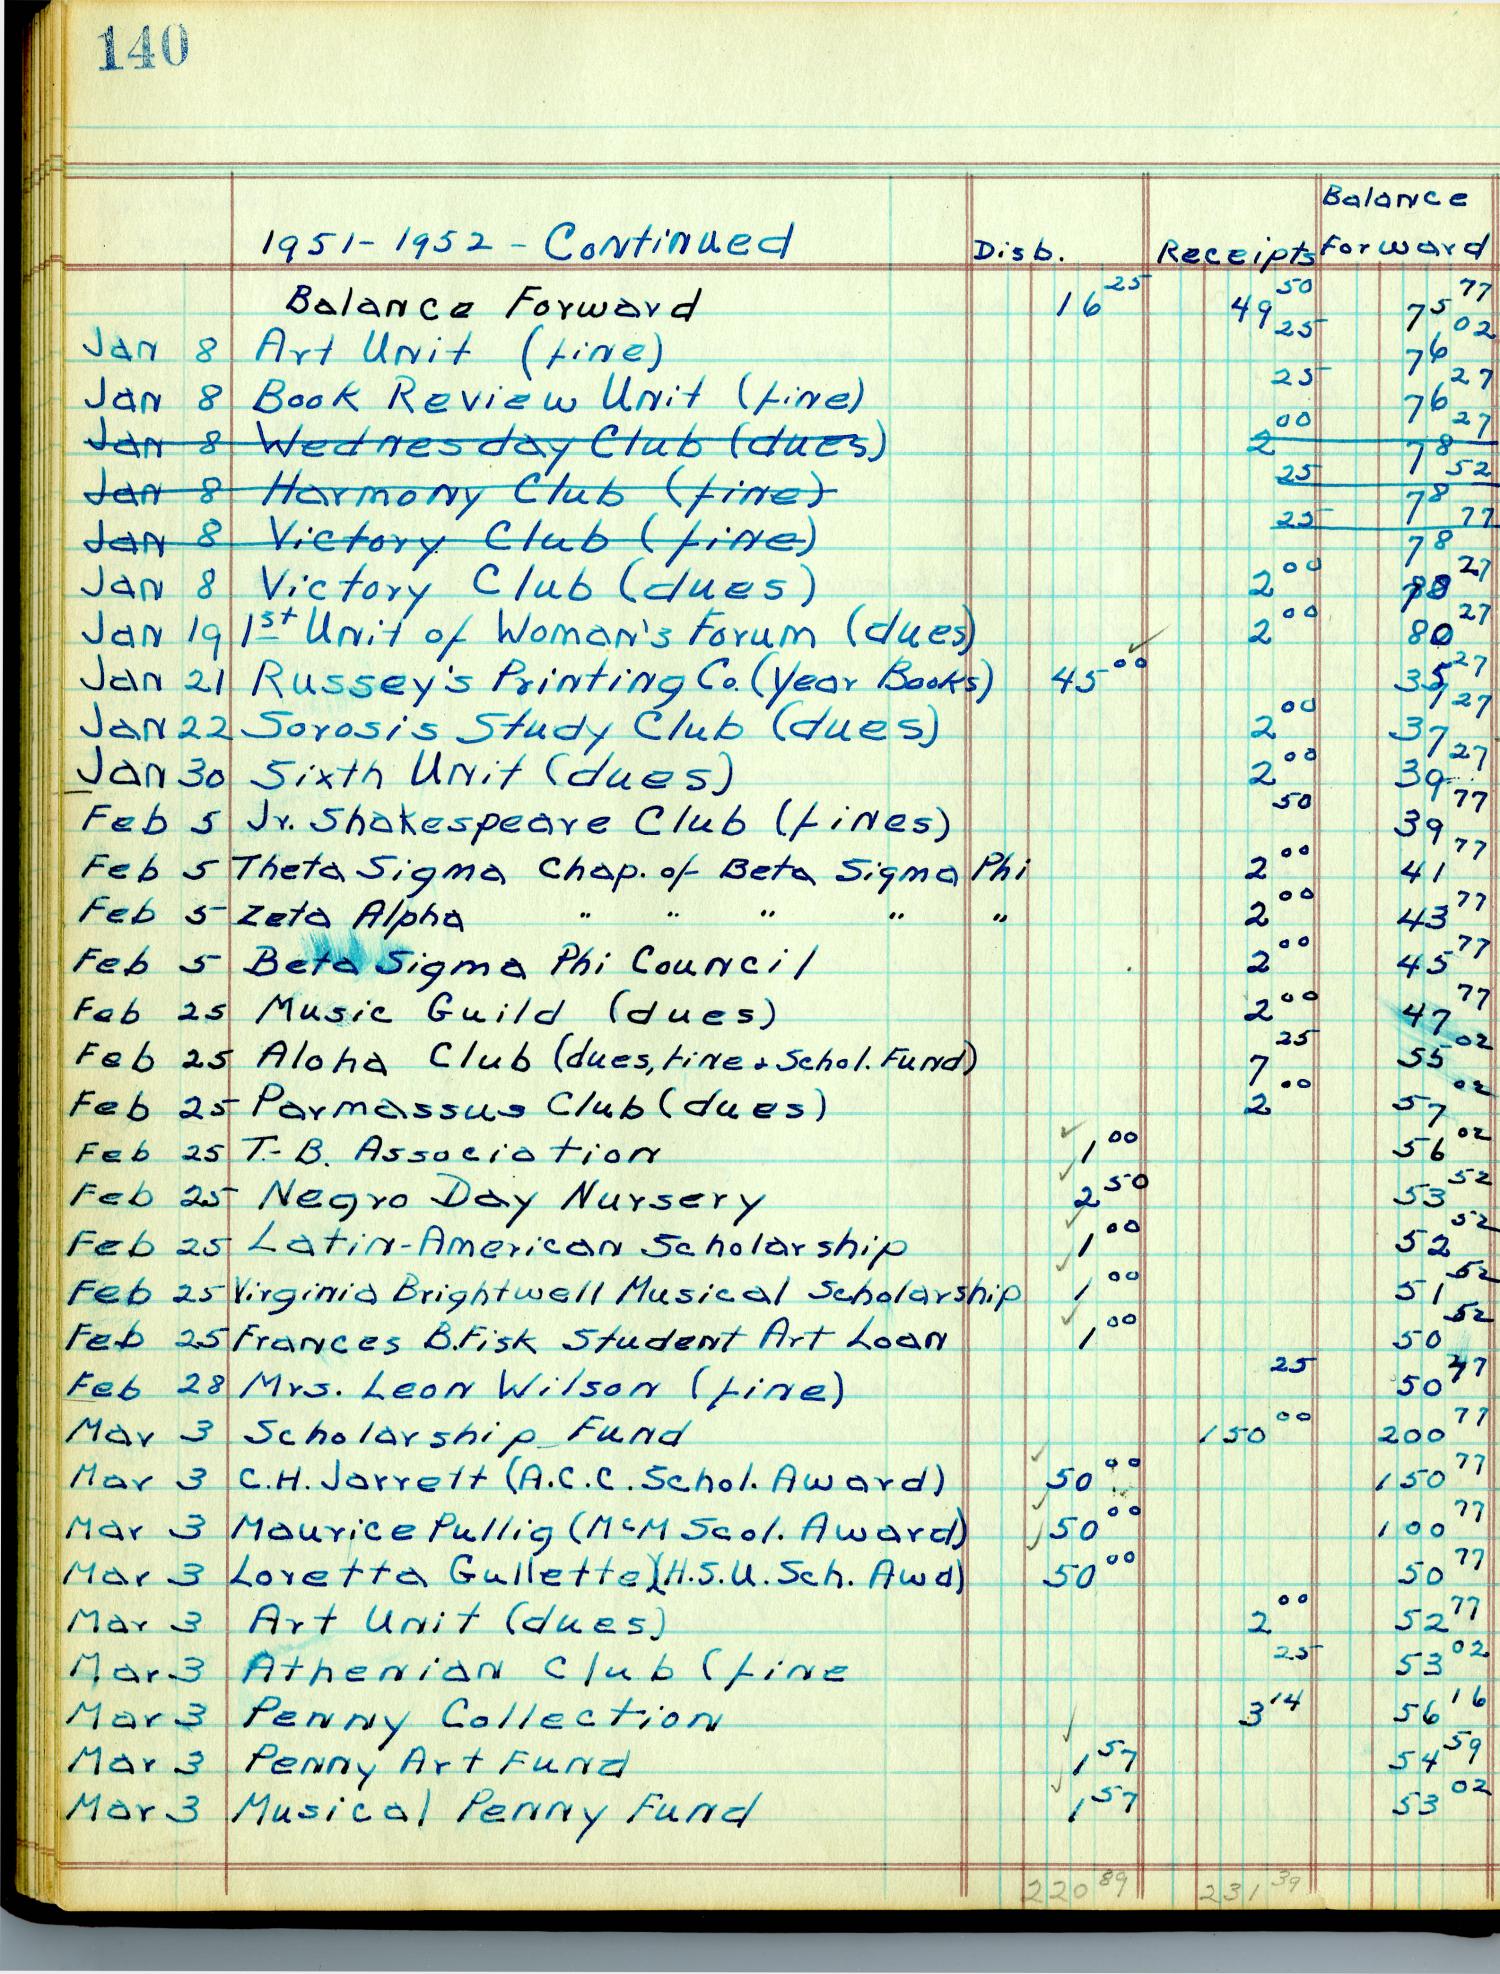 [Abilene City Federation of Clubs Account Book: 1937-1954]
                                                
                                                    [Sequence #]: 82 of 96
                                                